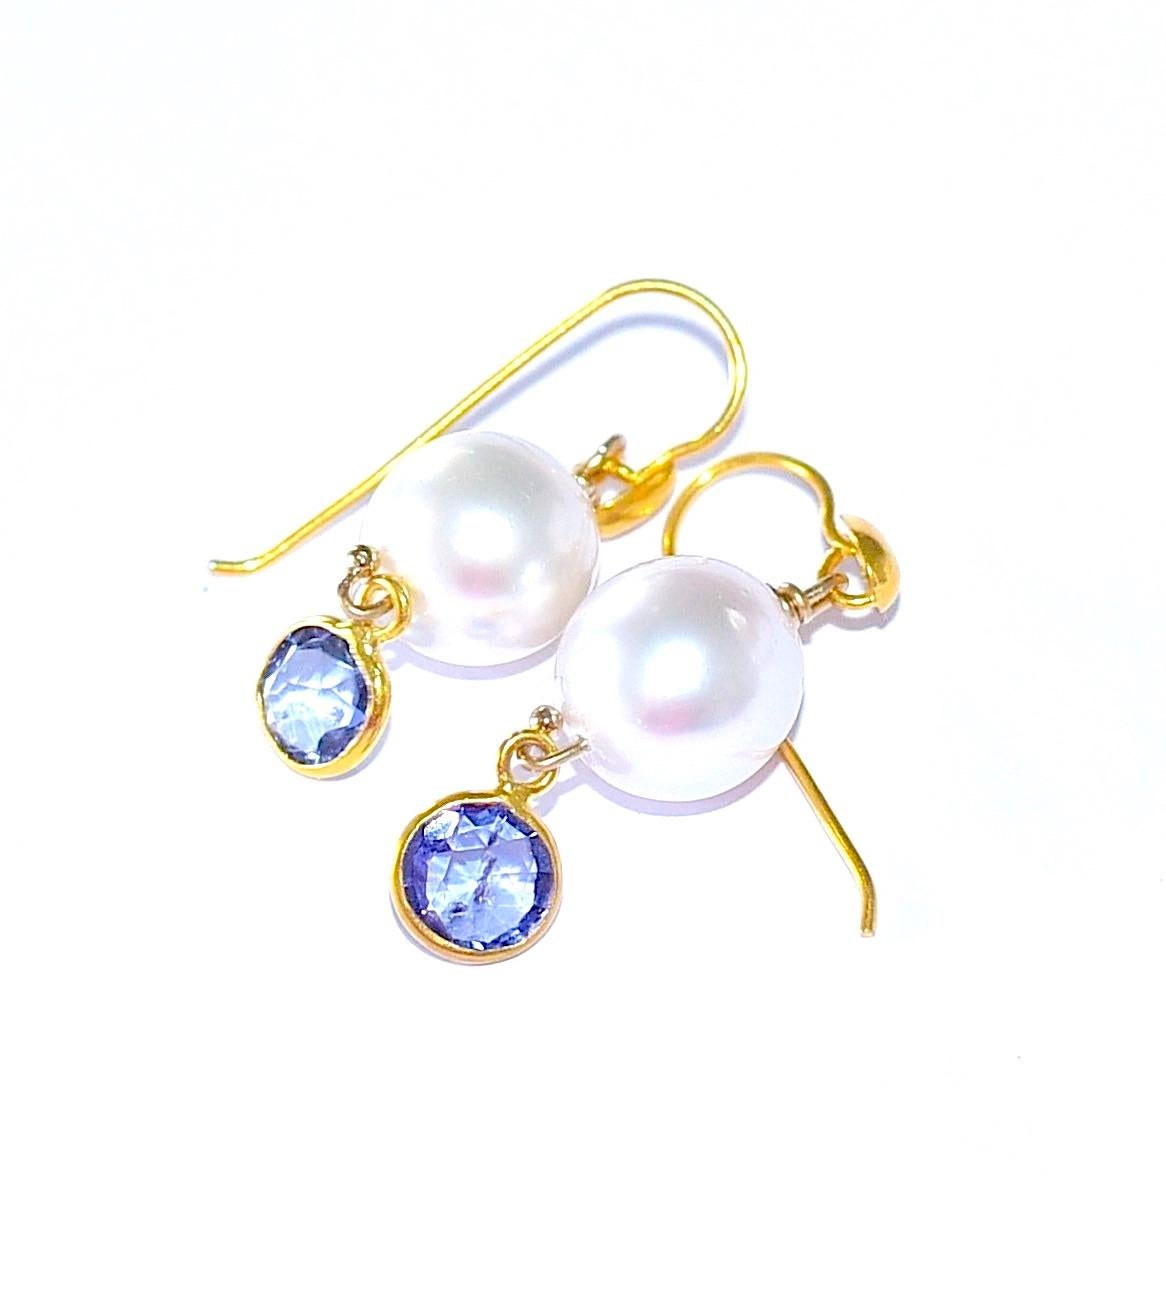 If you like pearls, then this simple, shiny, and beautiful piece of jewelry is for you!
White South Sea Cultured Pearl (10,3mm x 10,8mm ) with 18K Solid Yellow Gold Natural Blue Sapphire Gold Bezel C'charm together are lovely combo and cute looking